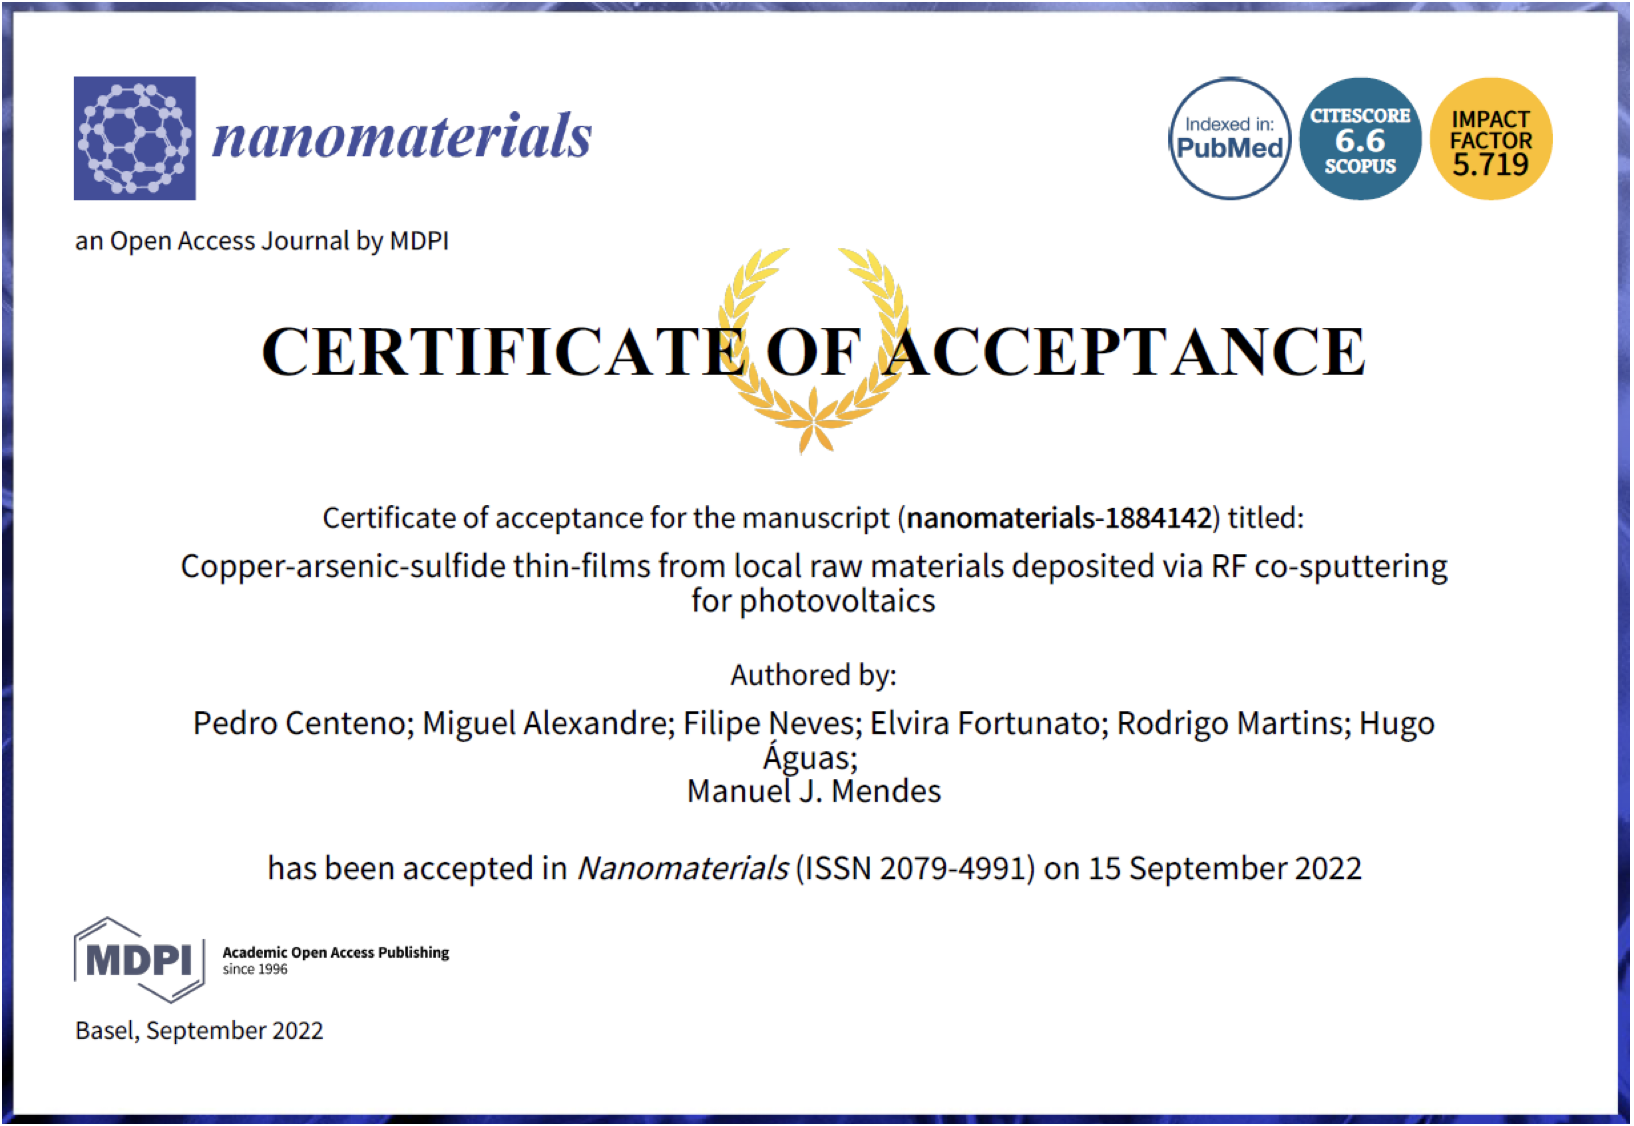 Article accepted in Nanomaterials journal 1